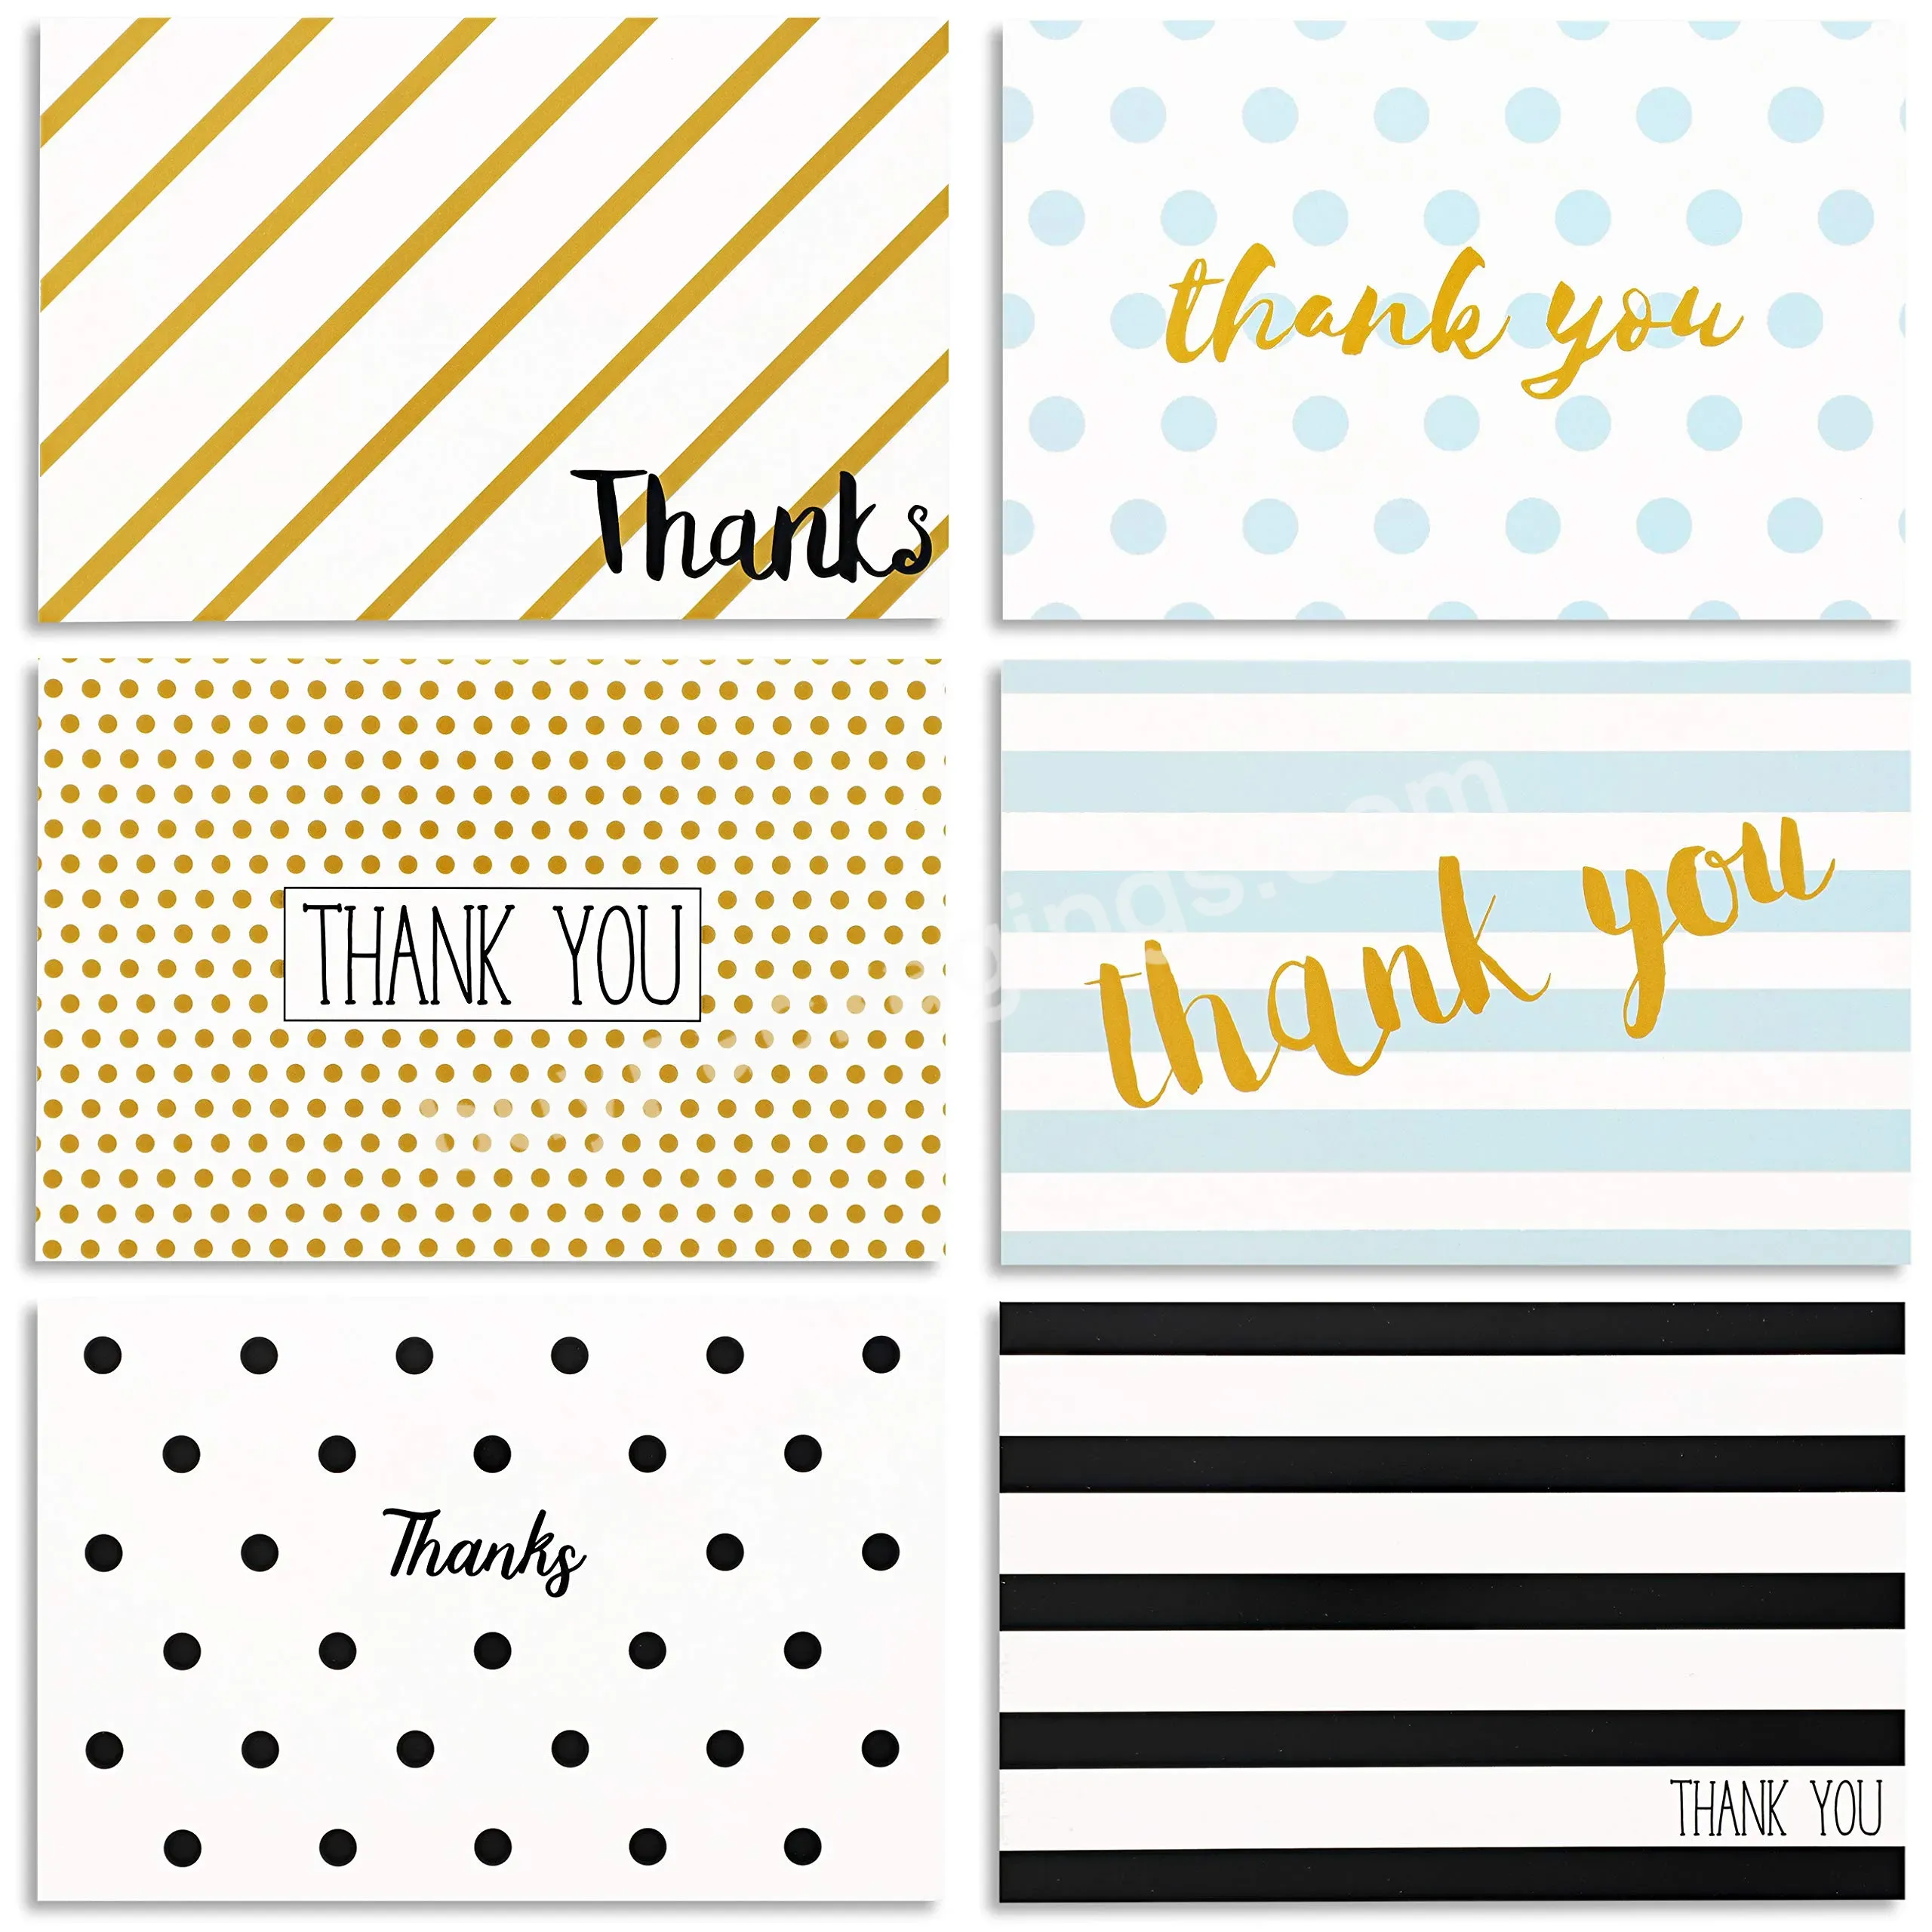 Small Business Thank You For Shopping With Us Cards Gold - Buy Small Business Thank You Cards,Thank You Card Gold,Thank You For Shopping With Us Cards.